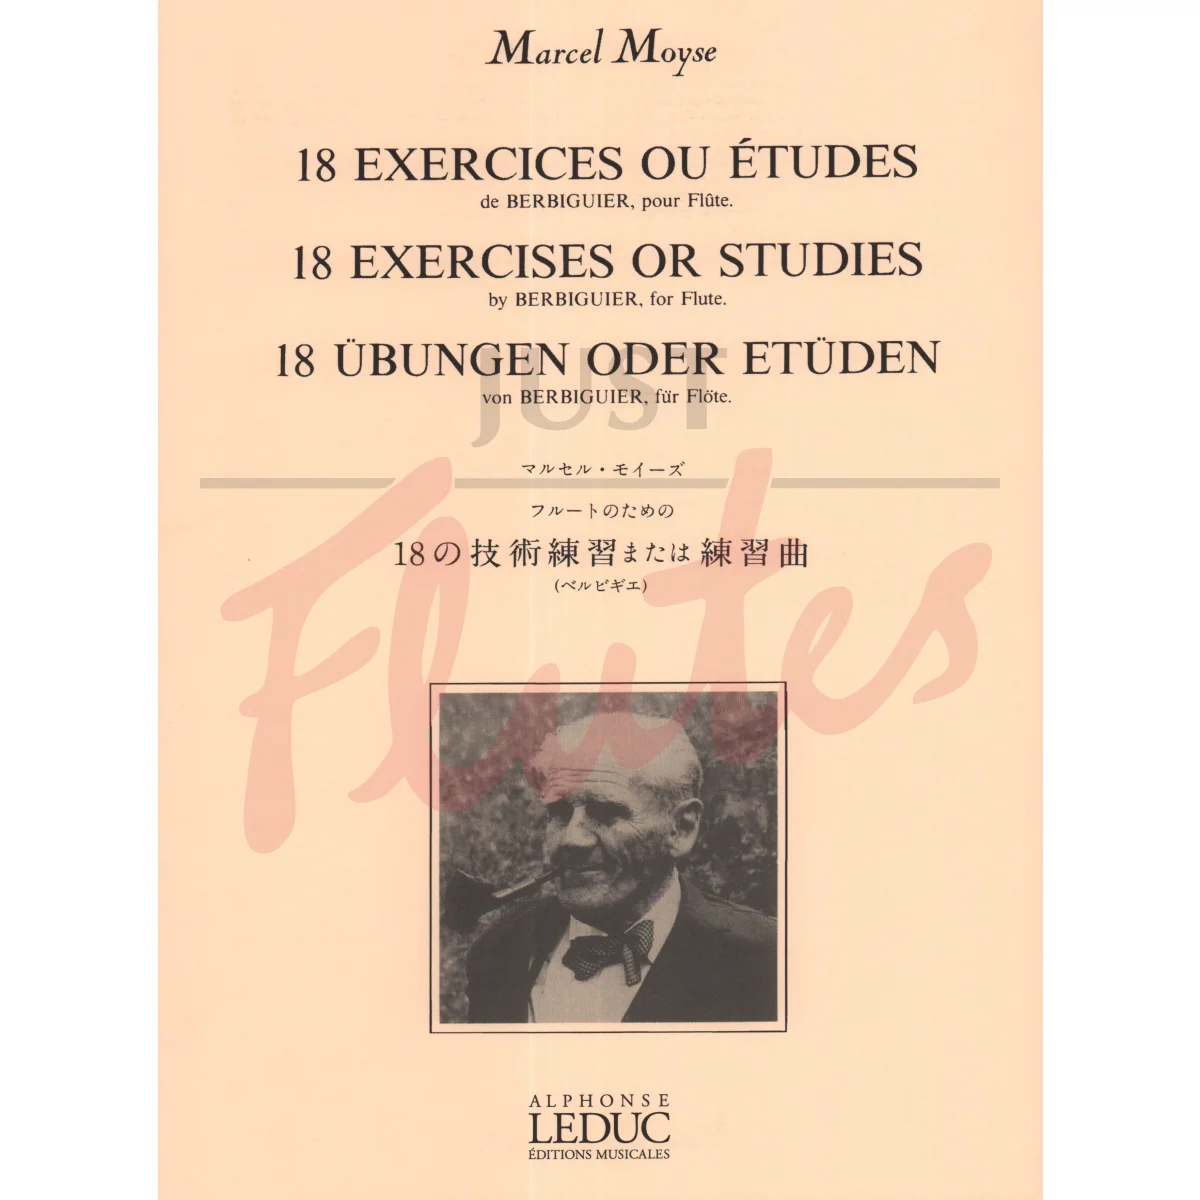 18 Exercices or Studies by Berbiguier for Flute